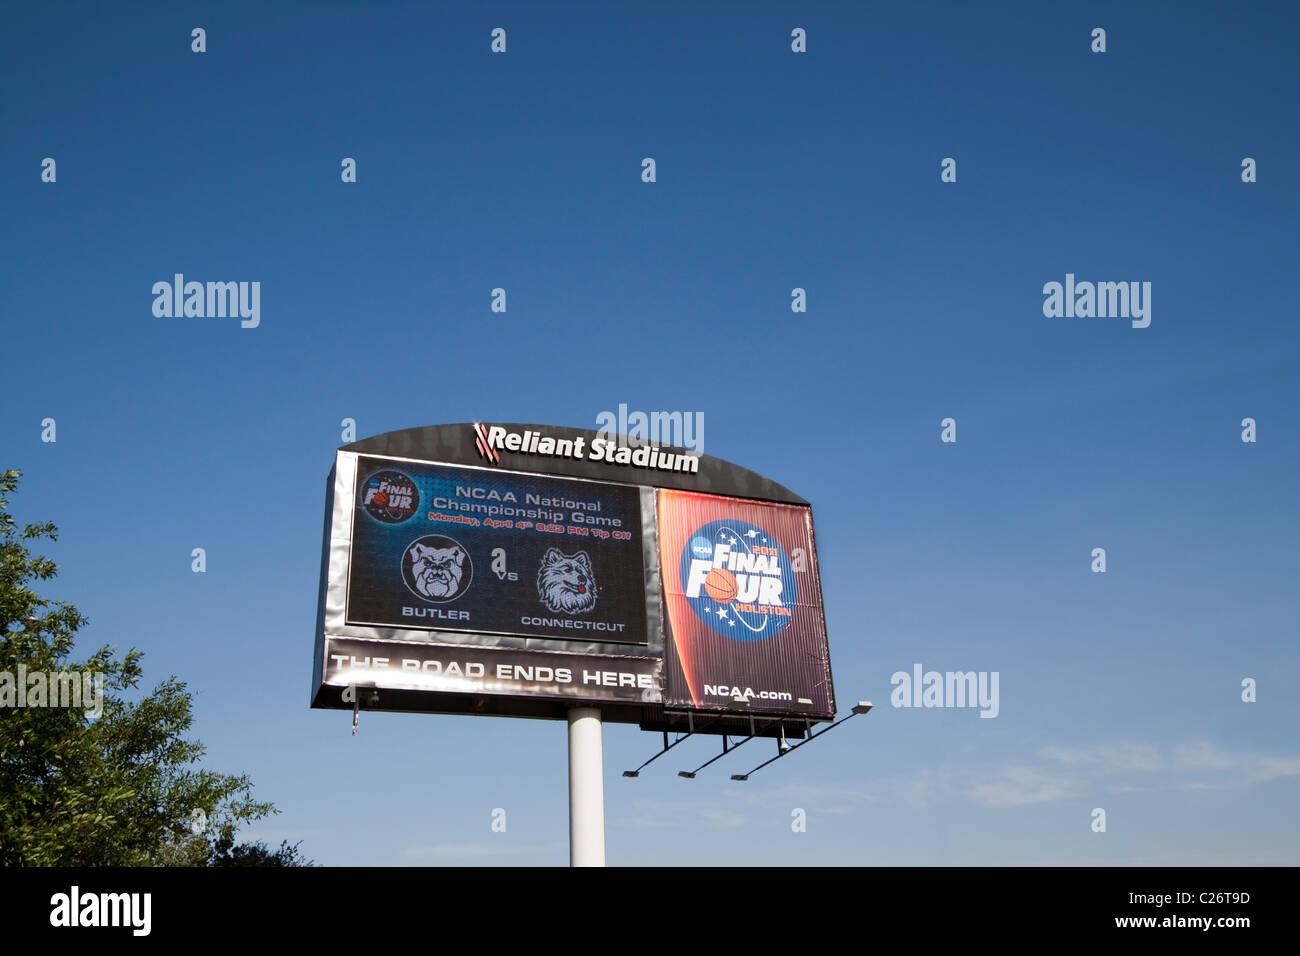 A sign talking about the NCAA Basketball Championship Game in Houston, Texas - taken on April 4th, 2011 Stock Photo